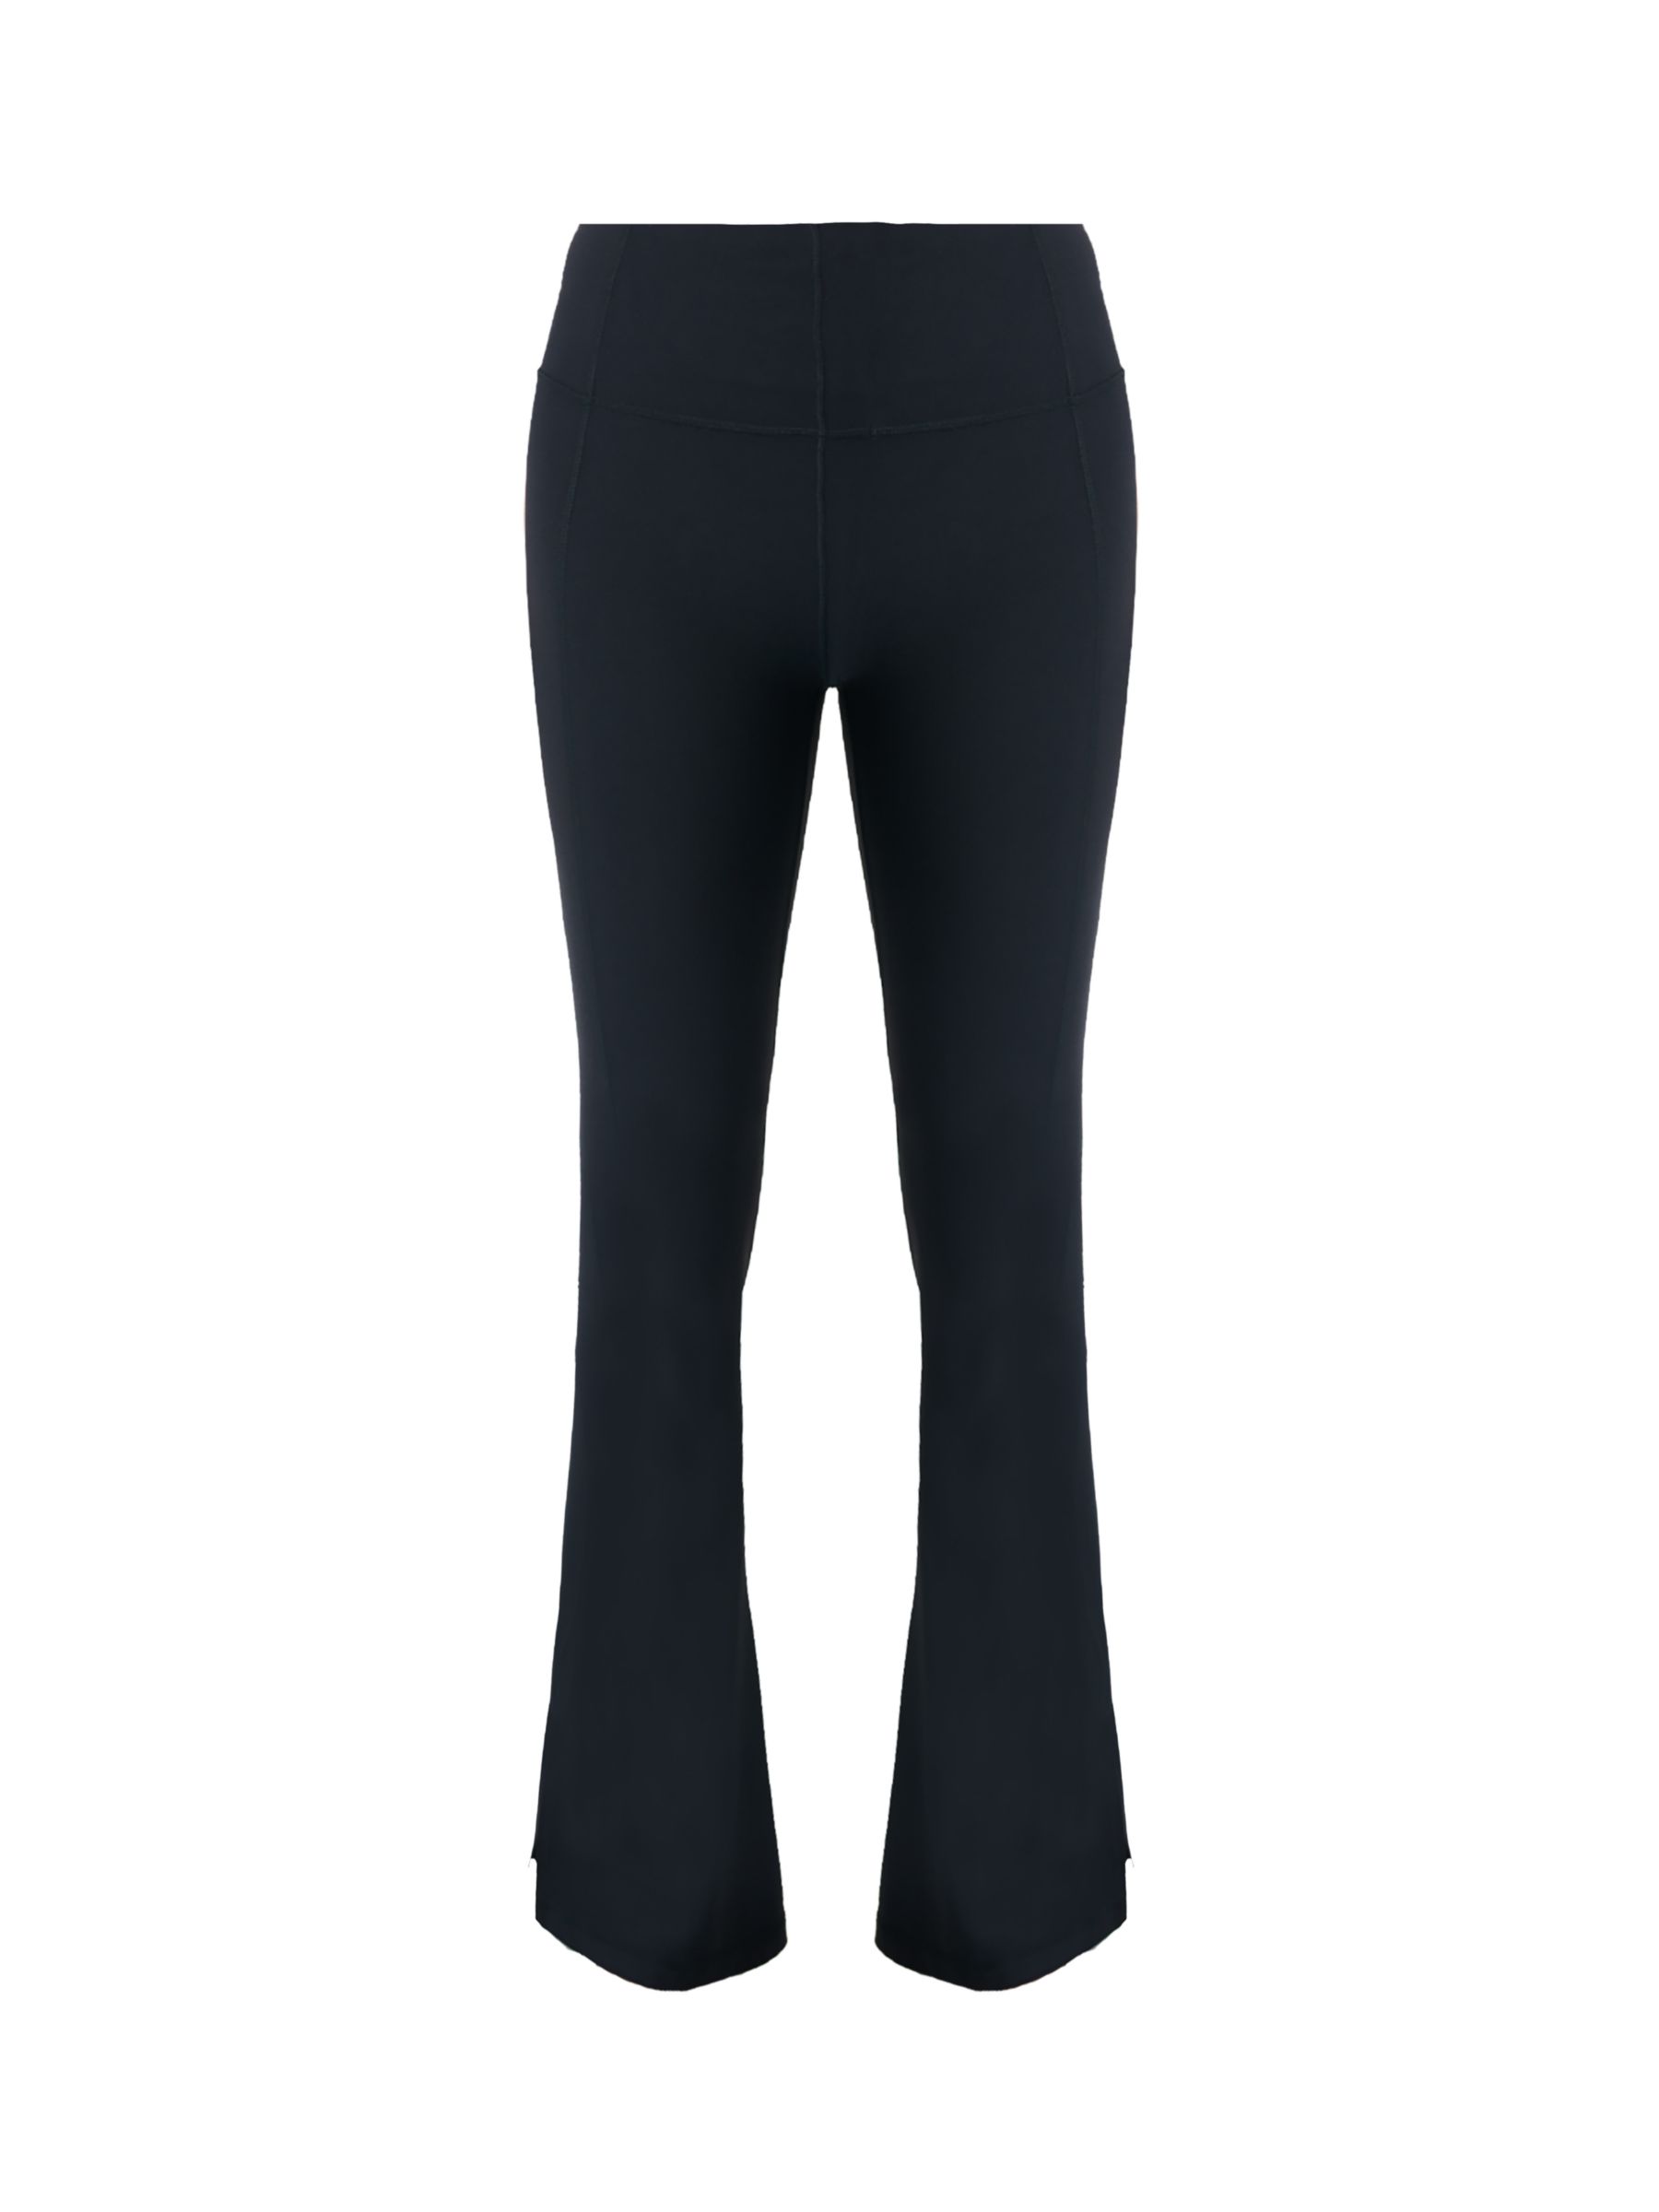 5 Black Flare Pants Outfits Because Athleta Knows Trousers - The